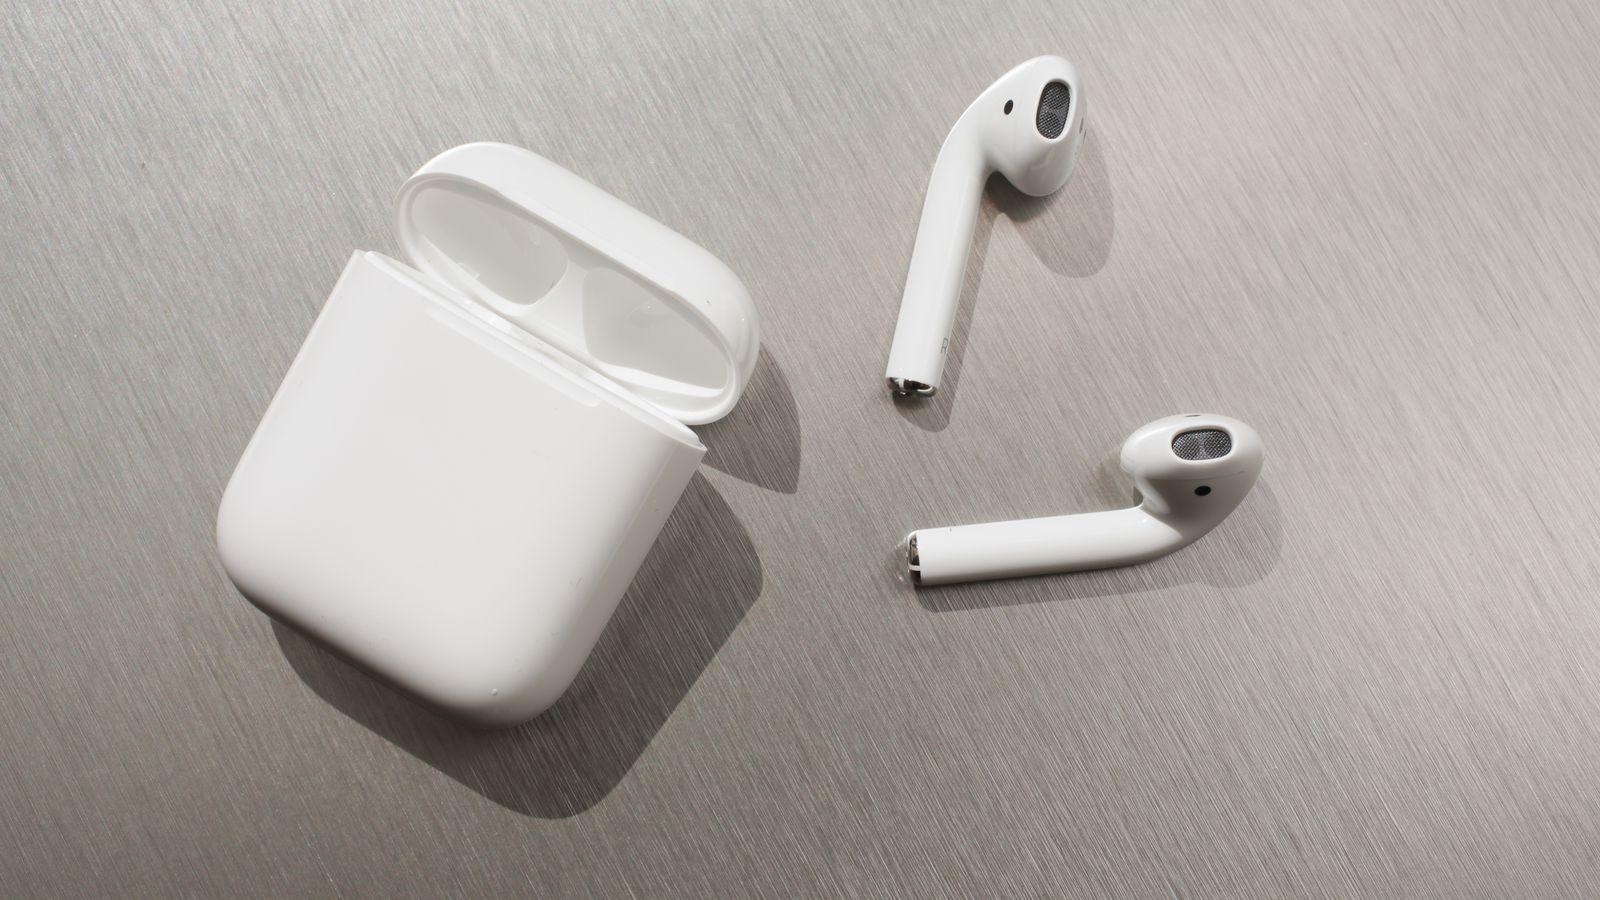 tips and tricks for your new Apple AirPods